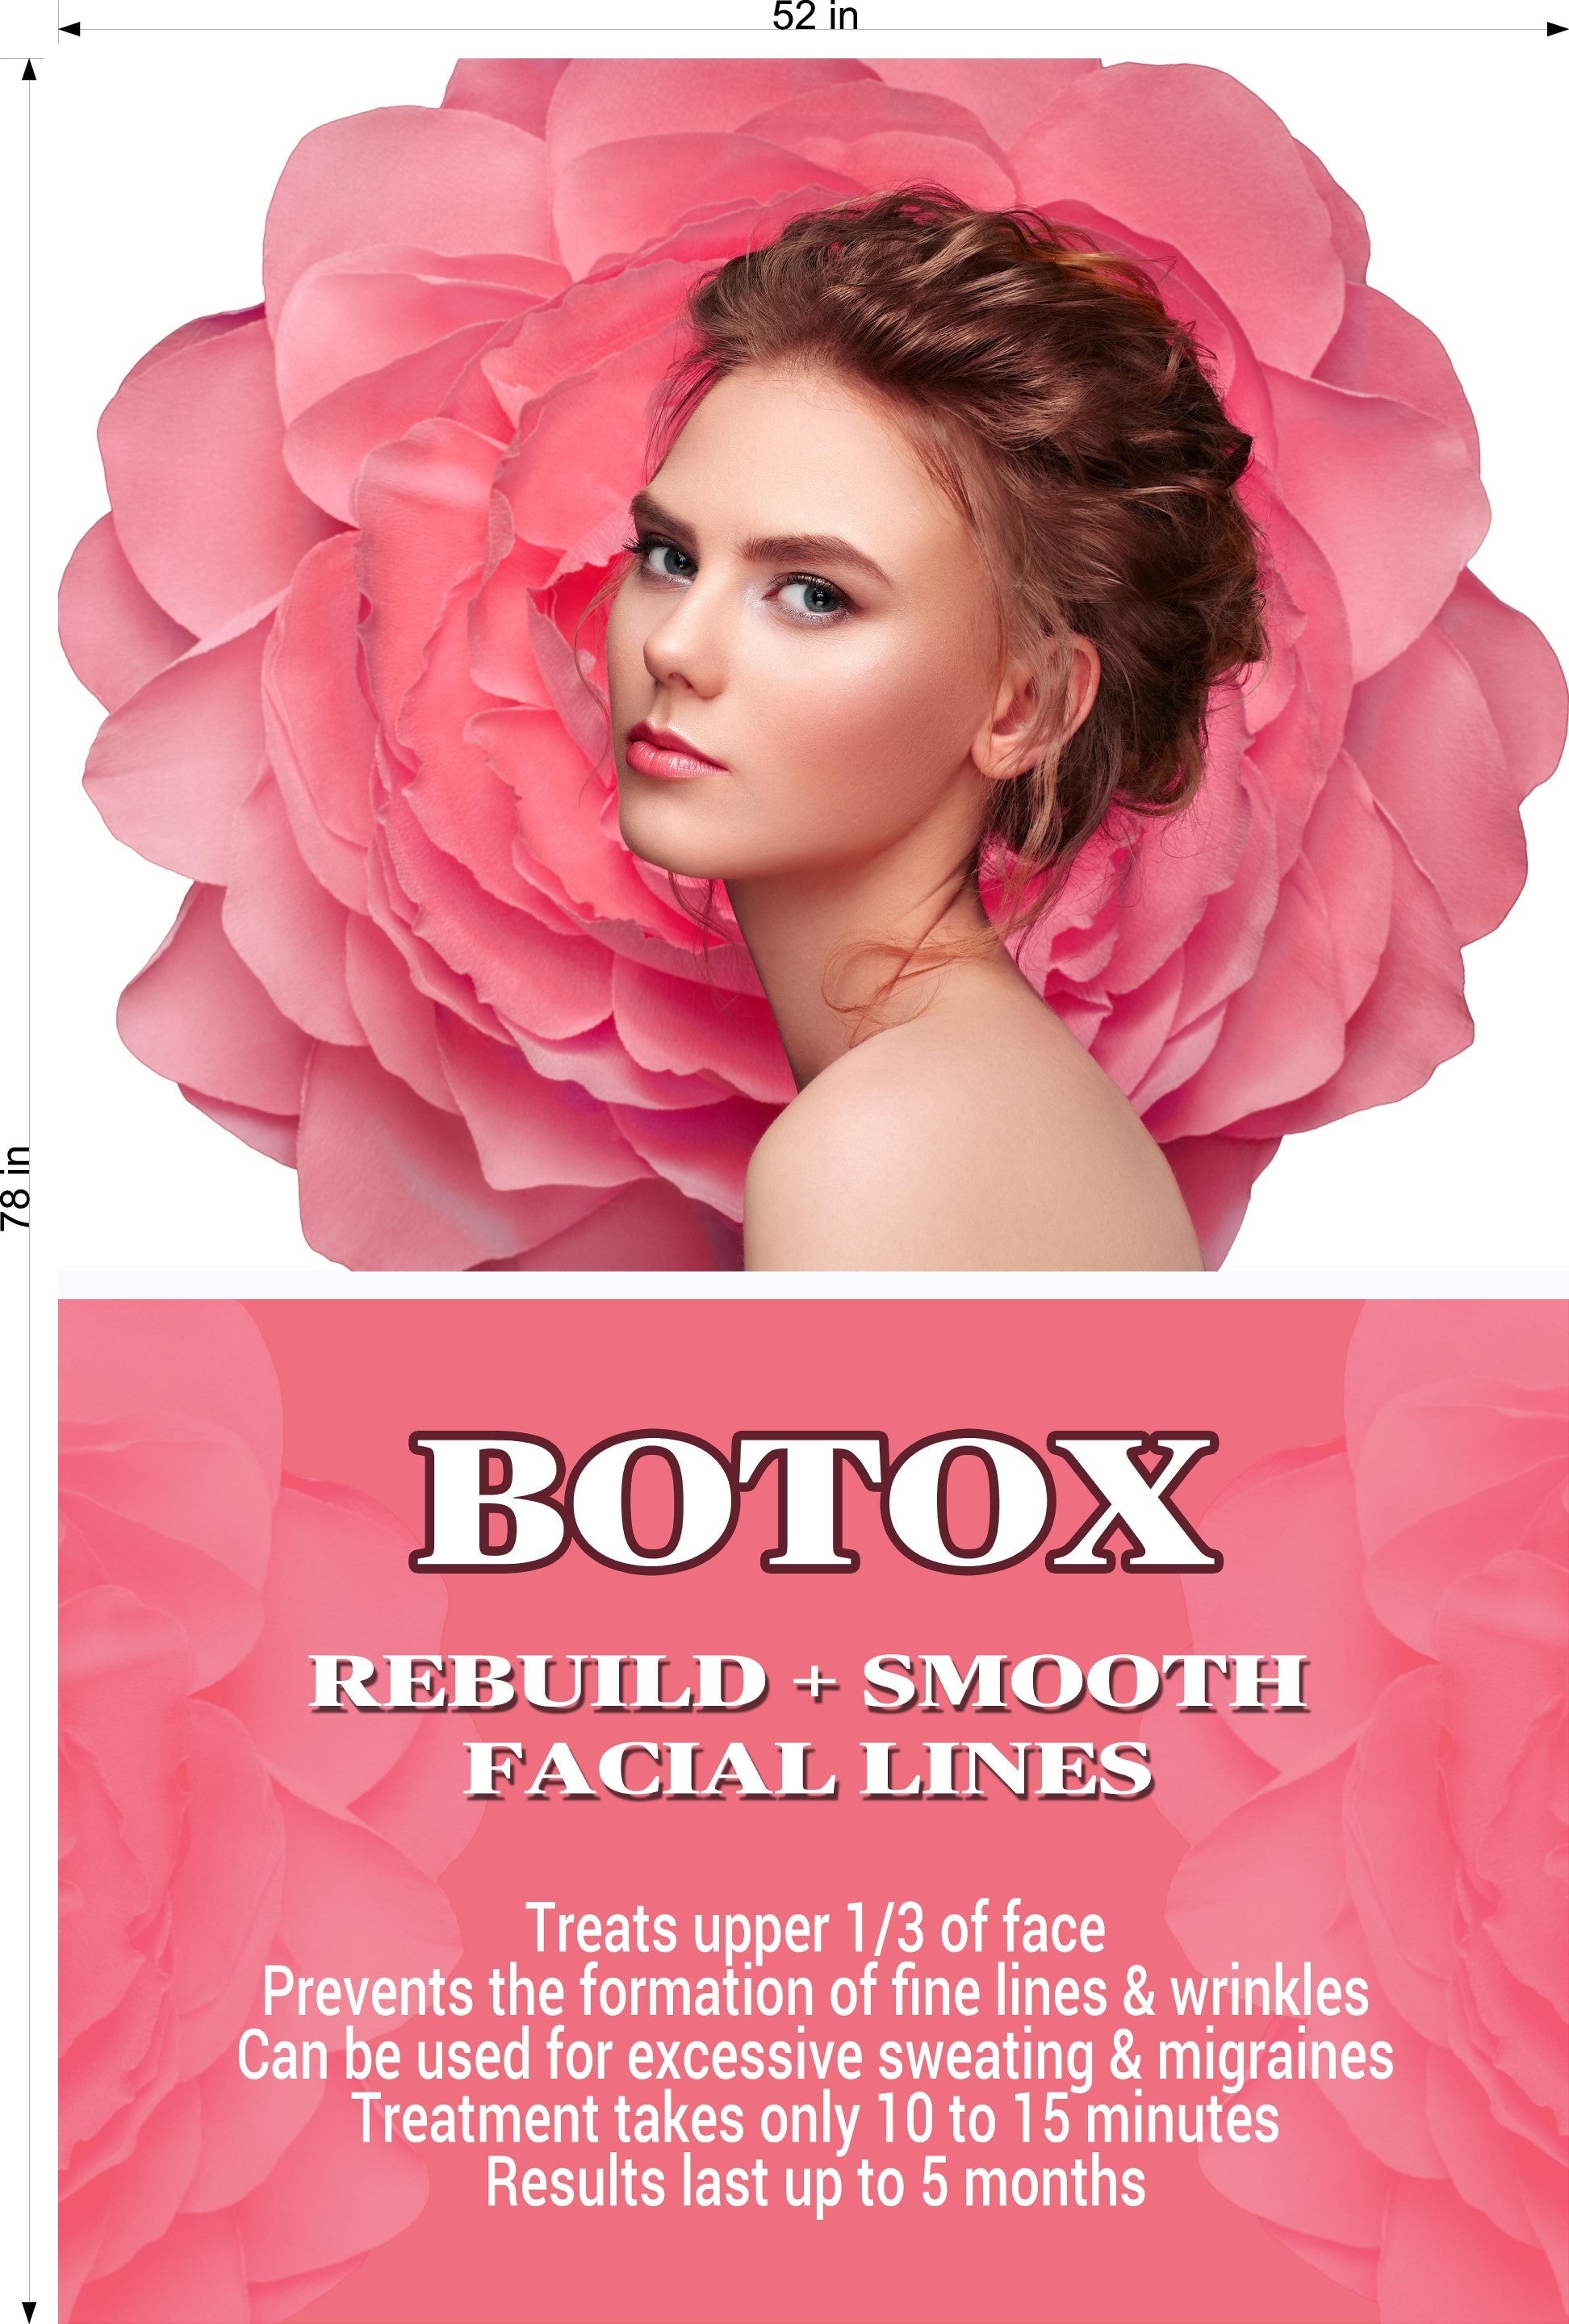 Botox 05 Photo-Realistic Paper Poster Premium Interior Inside Sign Advertising Marketing Wall Window Non-Laminated Vertical